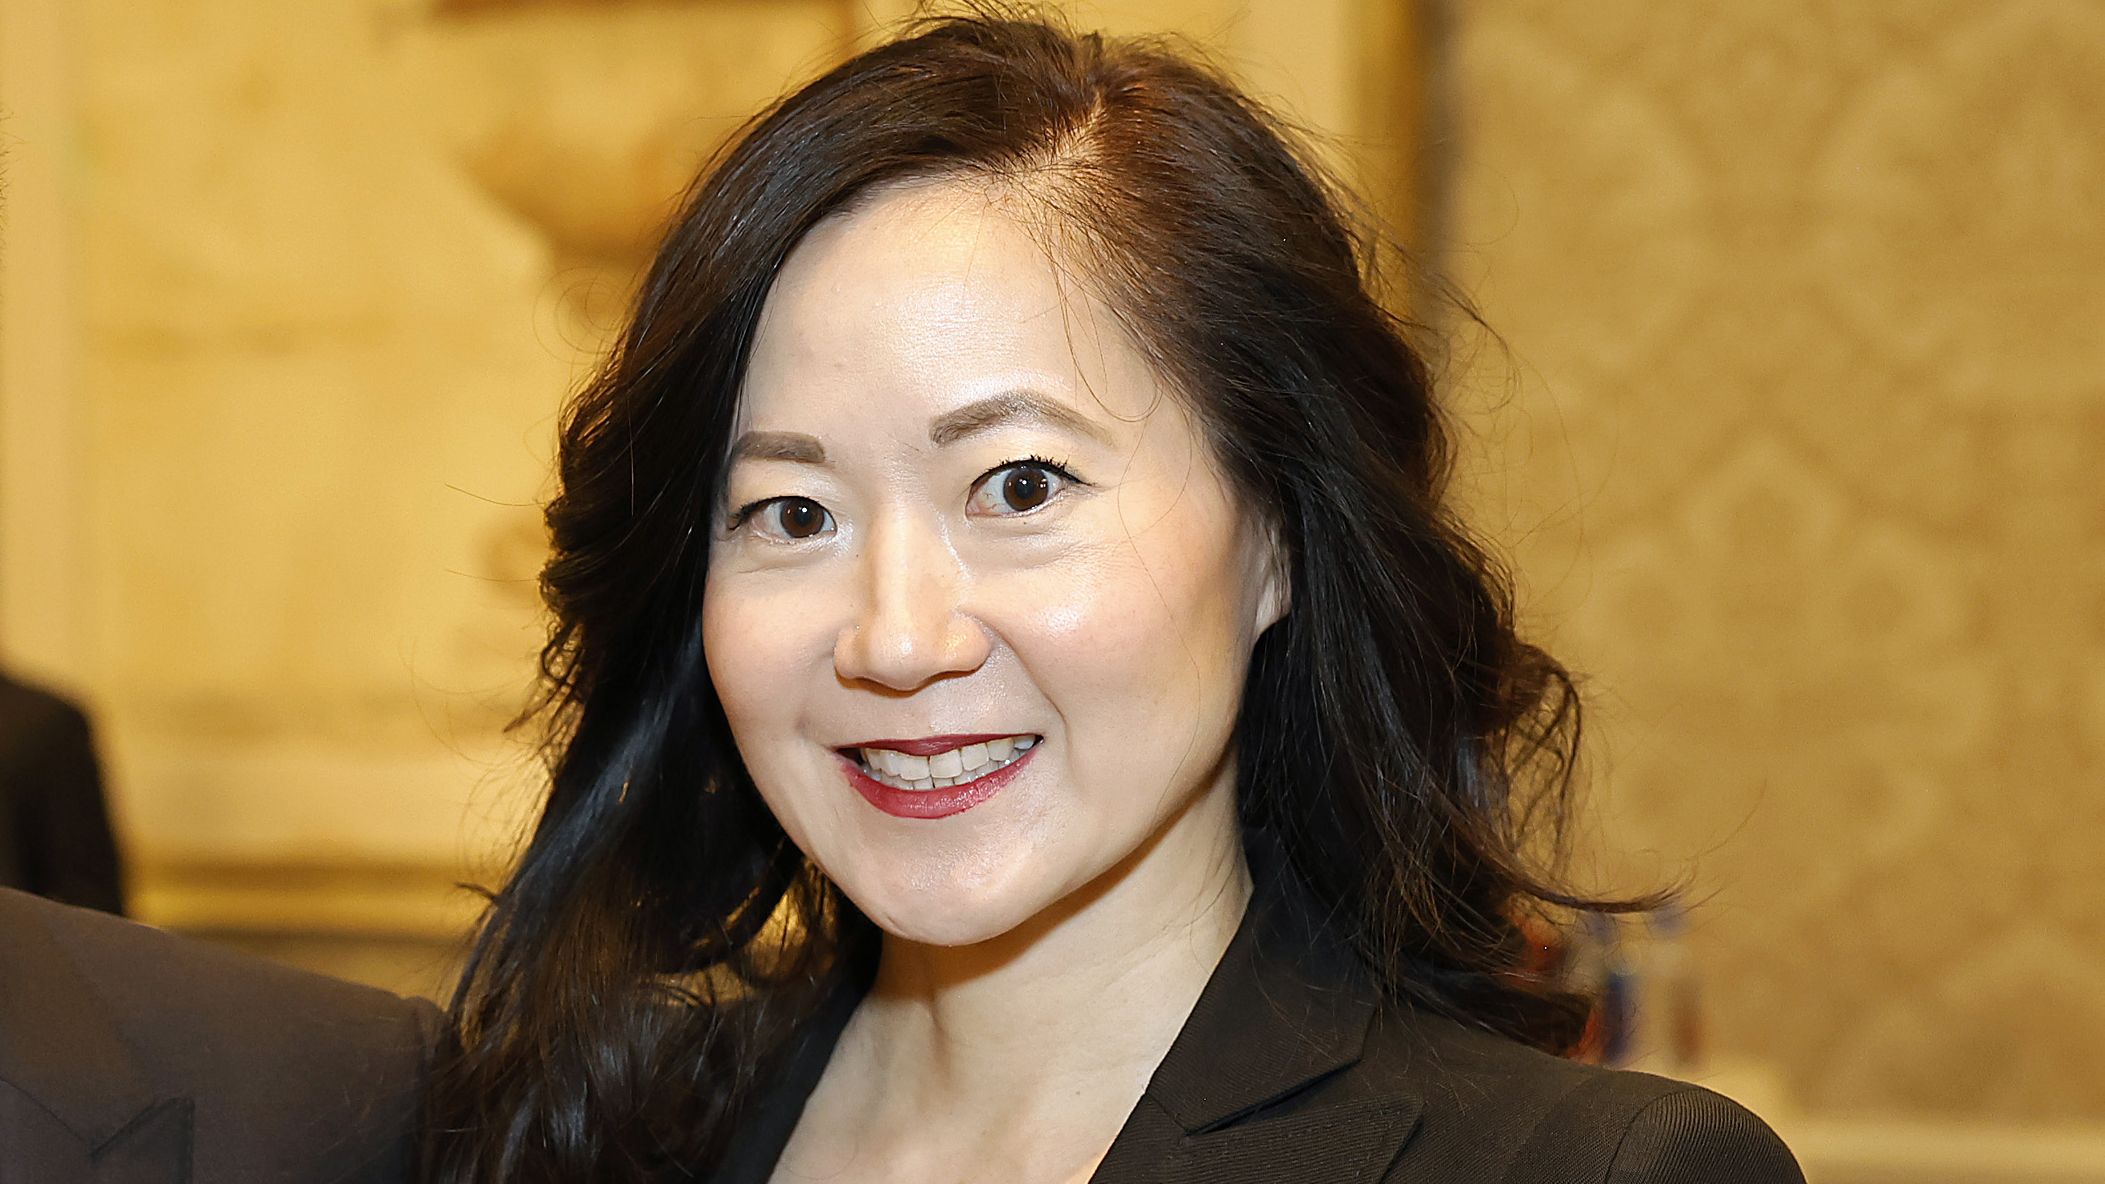 Shipping CEO Angela Chao, sister of former Cabinet member Elaine Chao, died after car became submerged in pond, WSJ reports - Accidents and Disasters - News